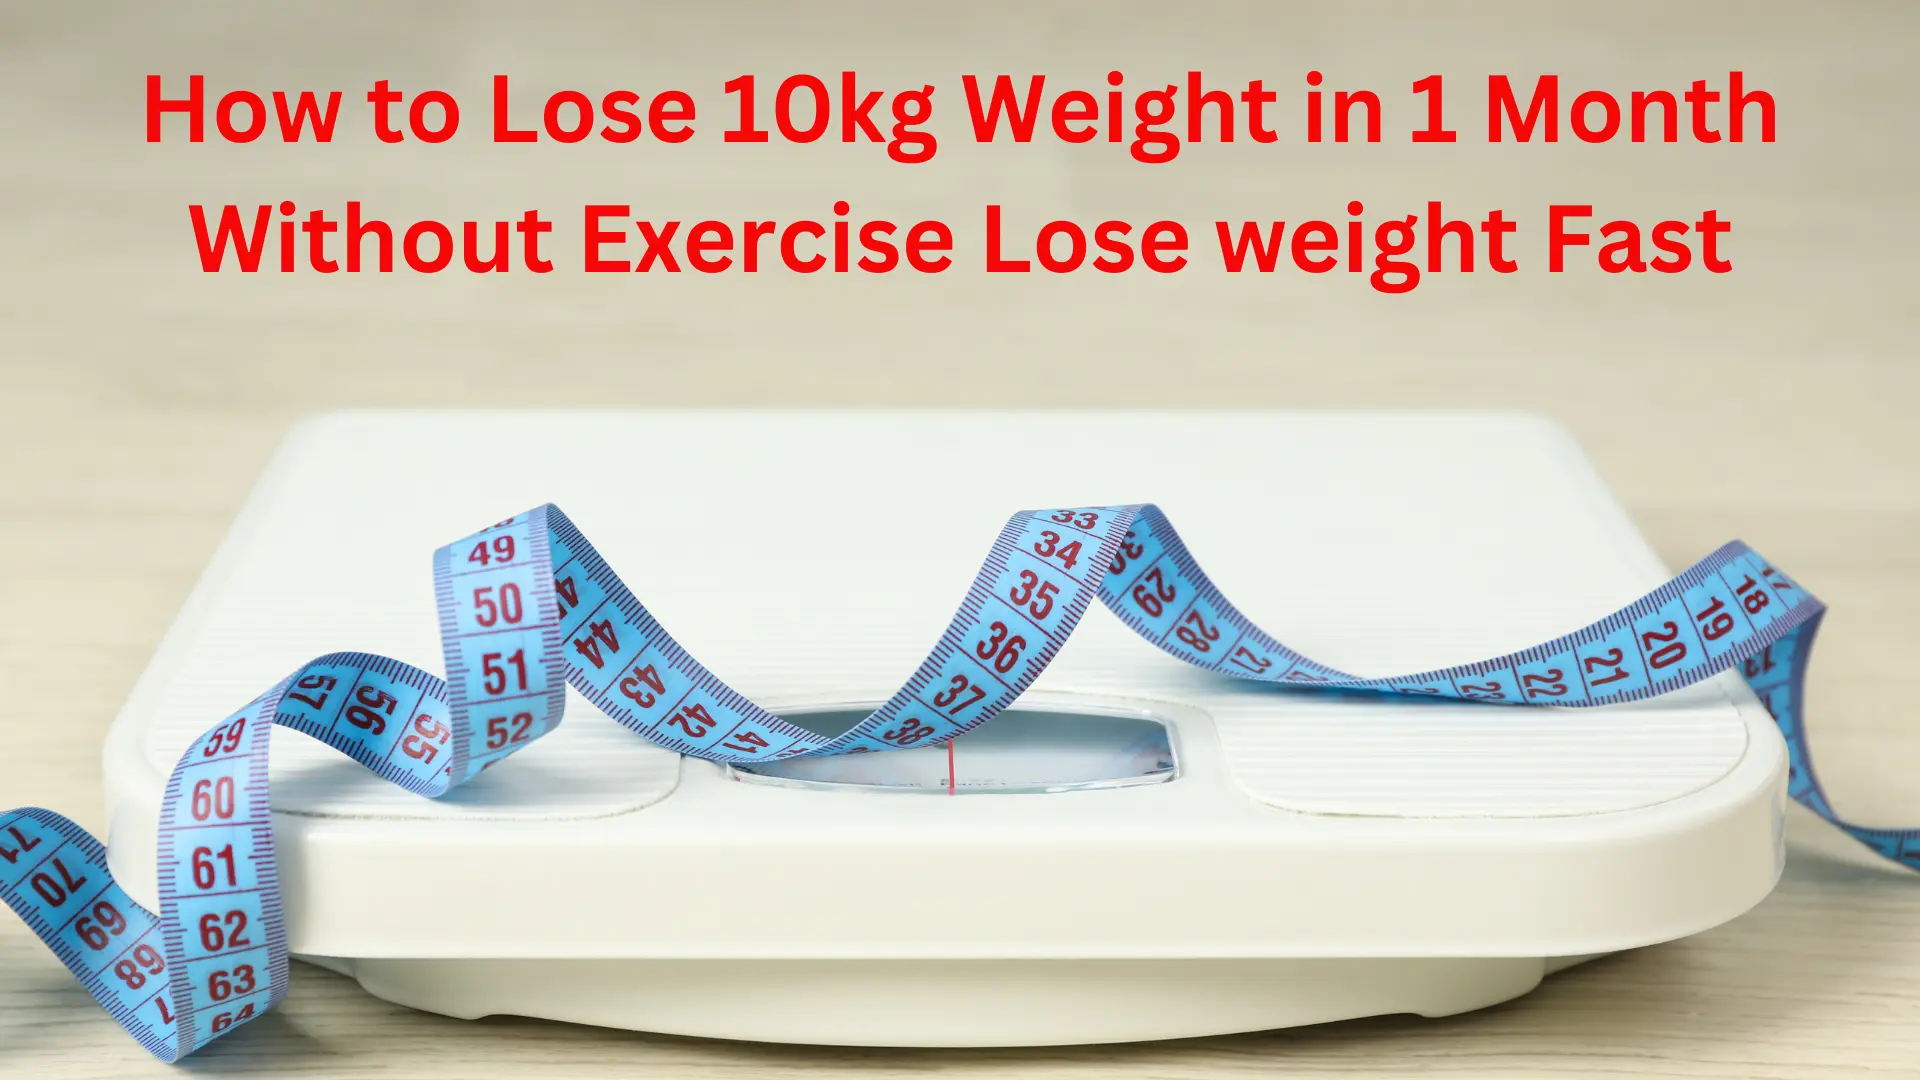 How to Lose 10kg Weight in 1 Month Without Exercise Lose weight Fast